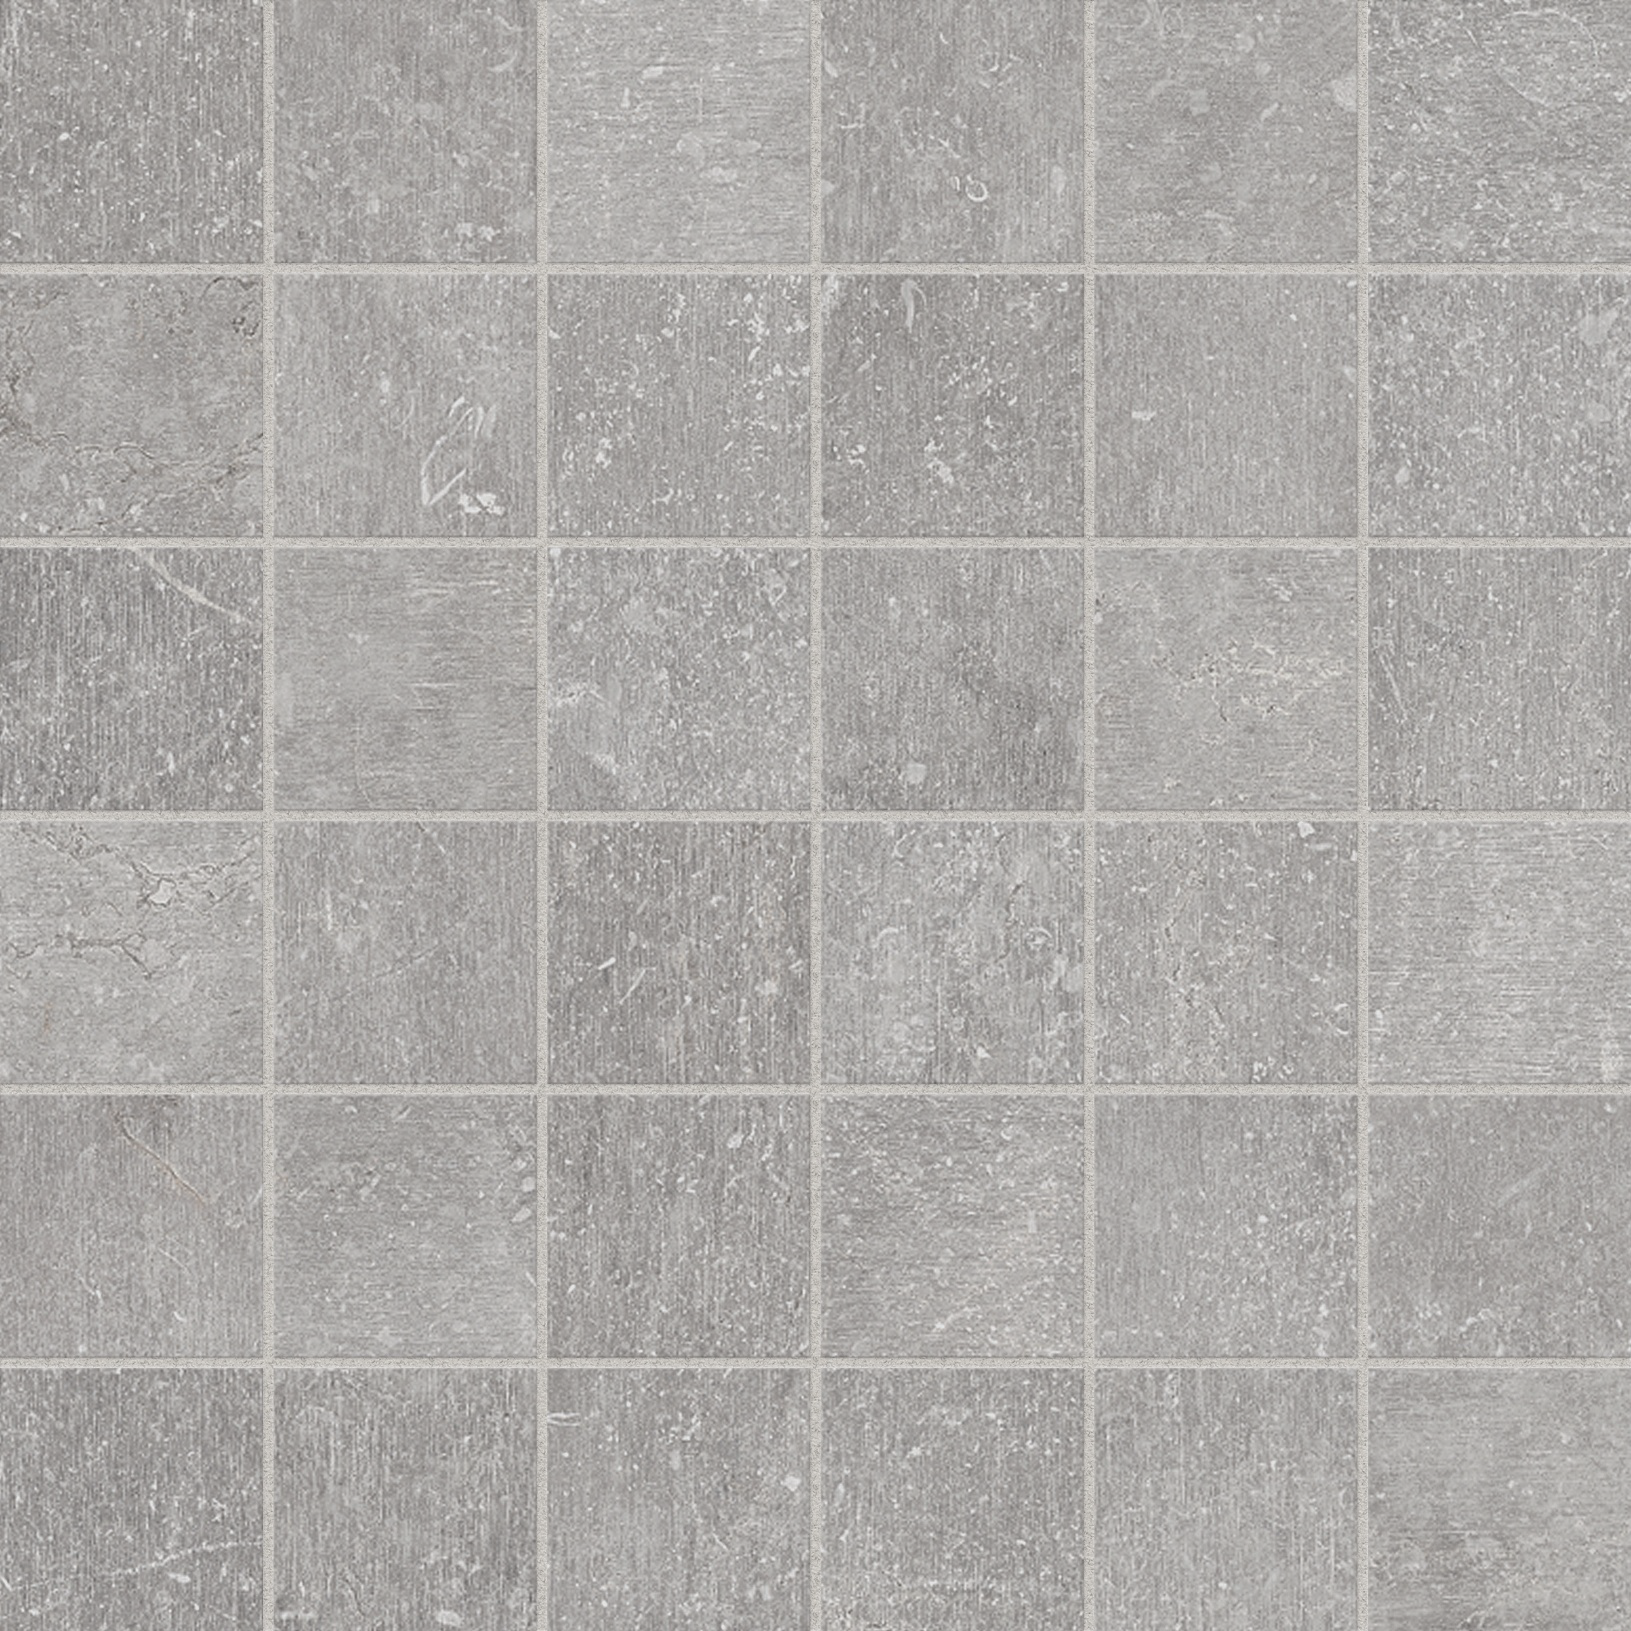 mica straight stack 2x2-inch pattern glazed porcelain mosaic from nexus anatolia collection distributed by surface group international matte finish straight edge edge mesh shape